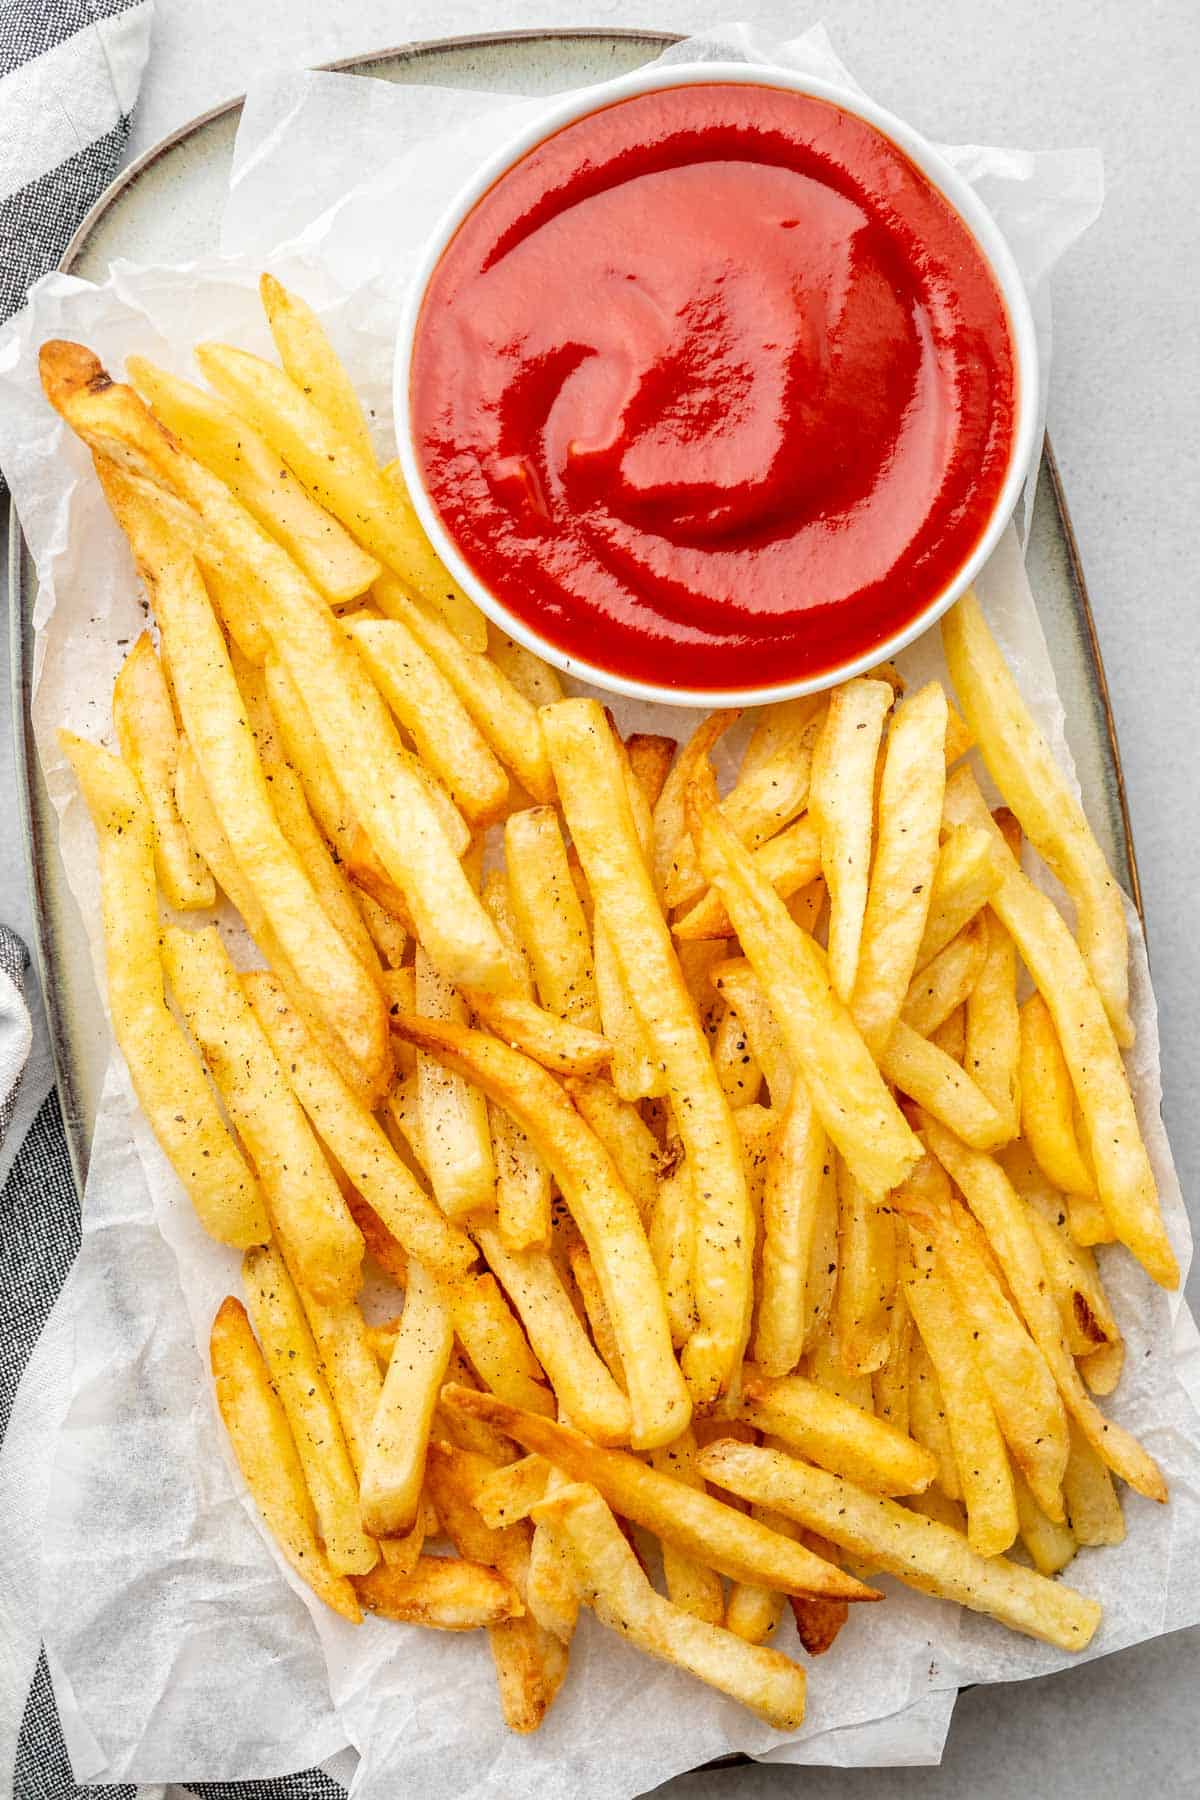 golden and crispy French fries served with ketchup